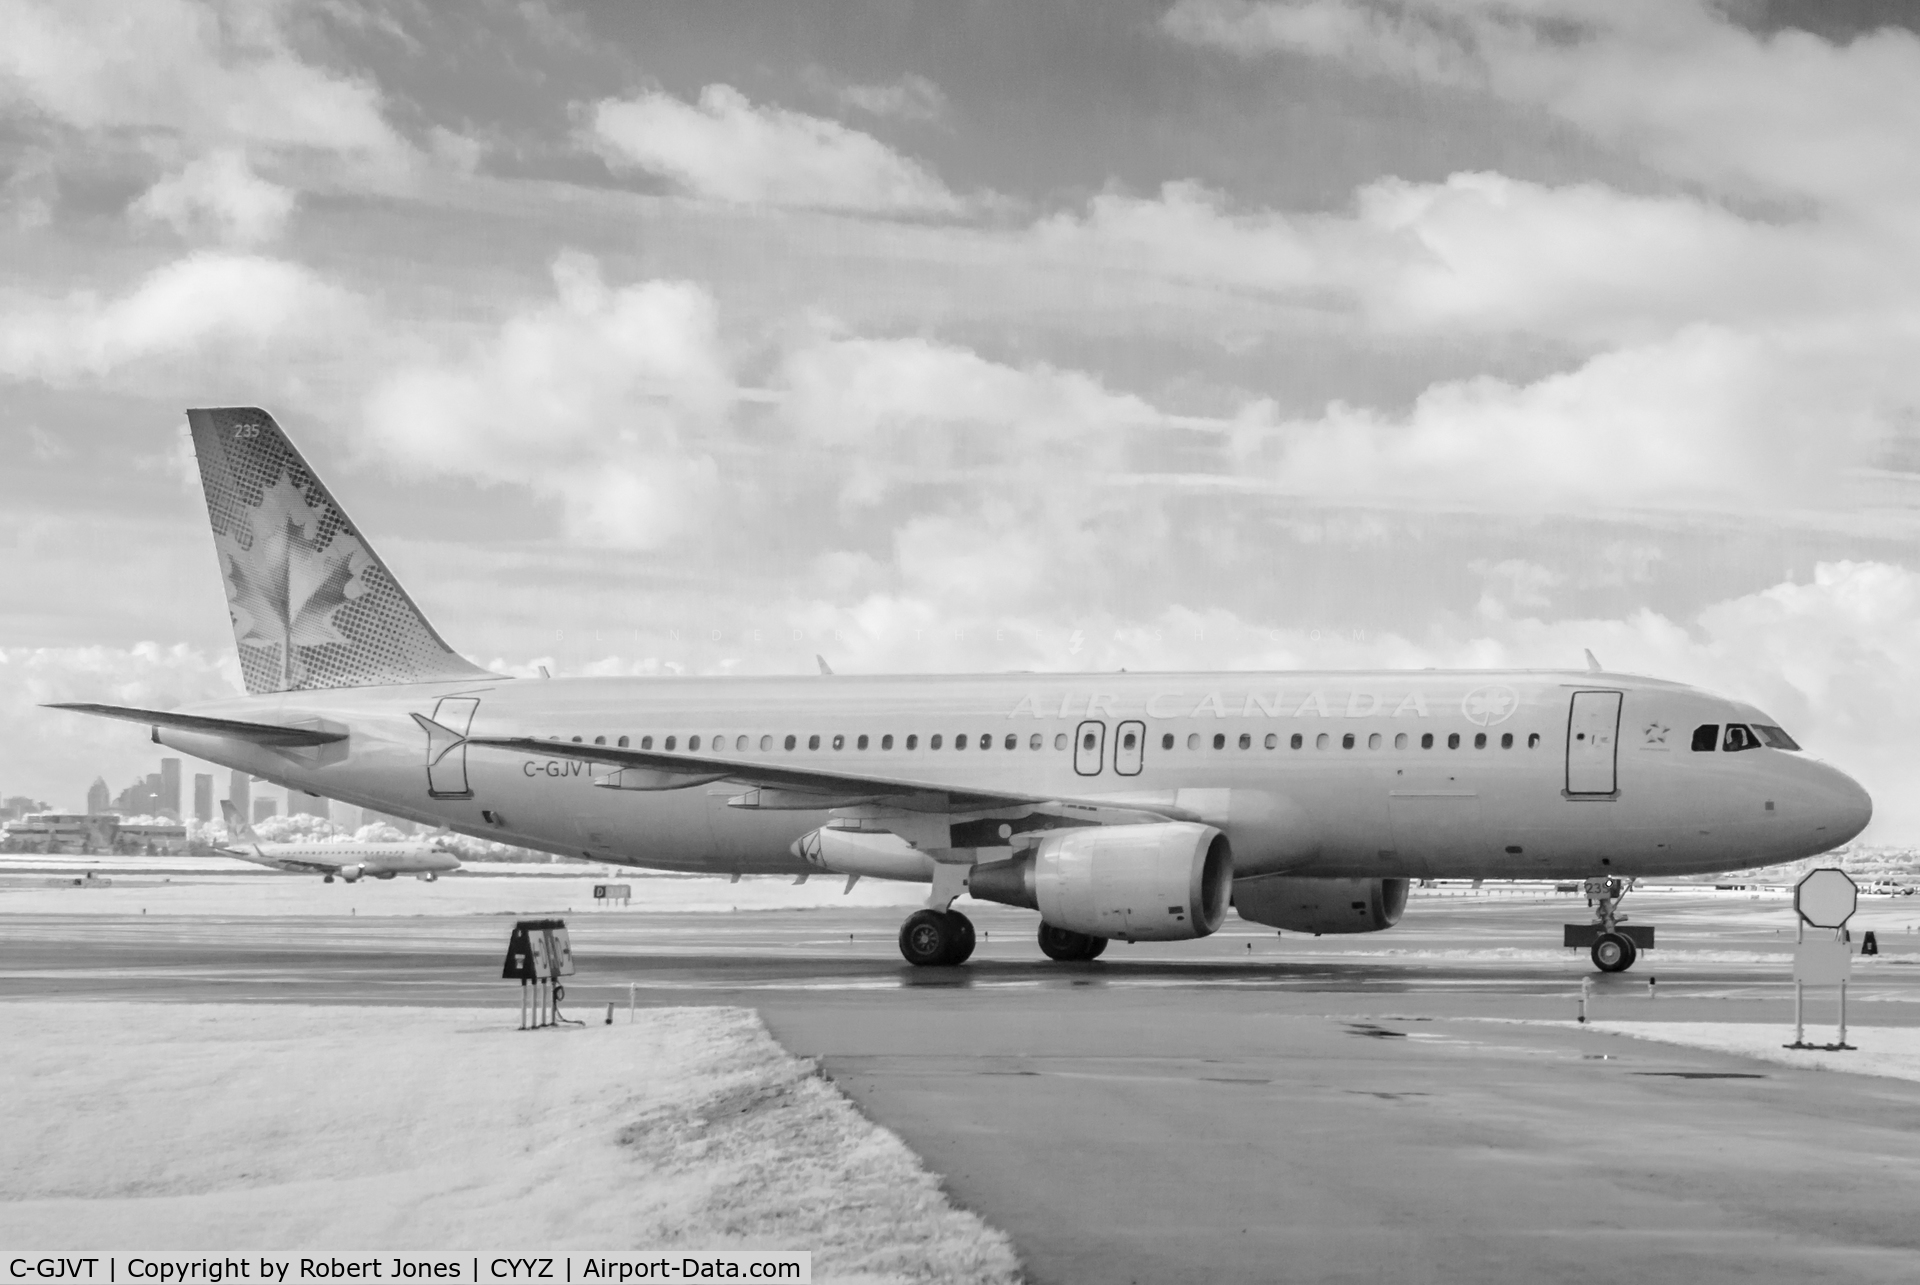 C-GJVT, 2002 Airbus A320-214 C/N 1719, At Toronto Pearson in infrared